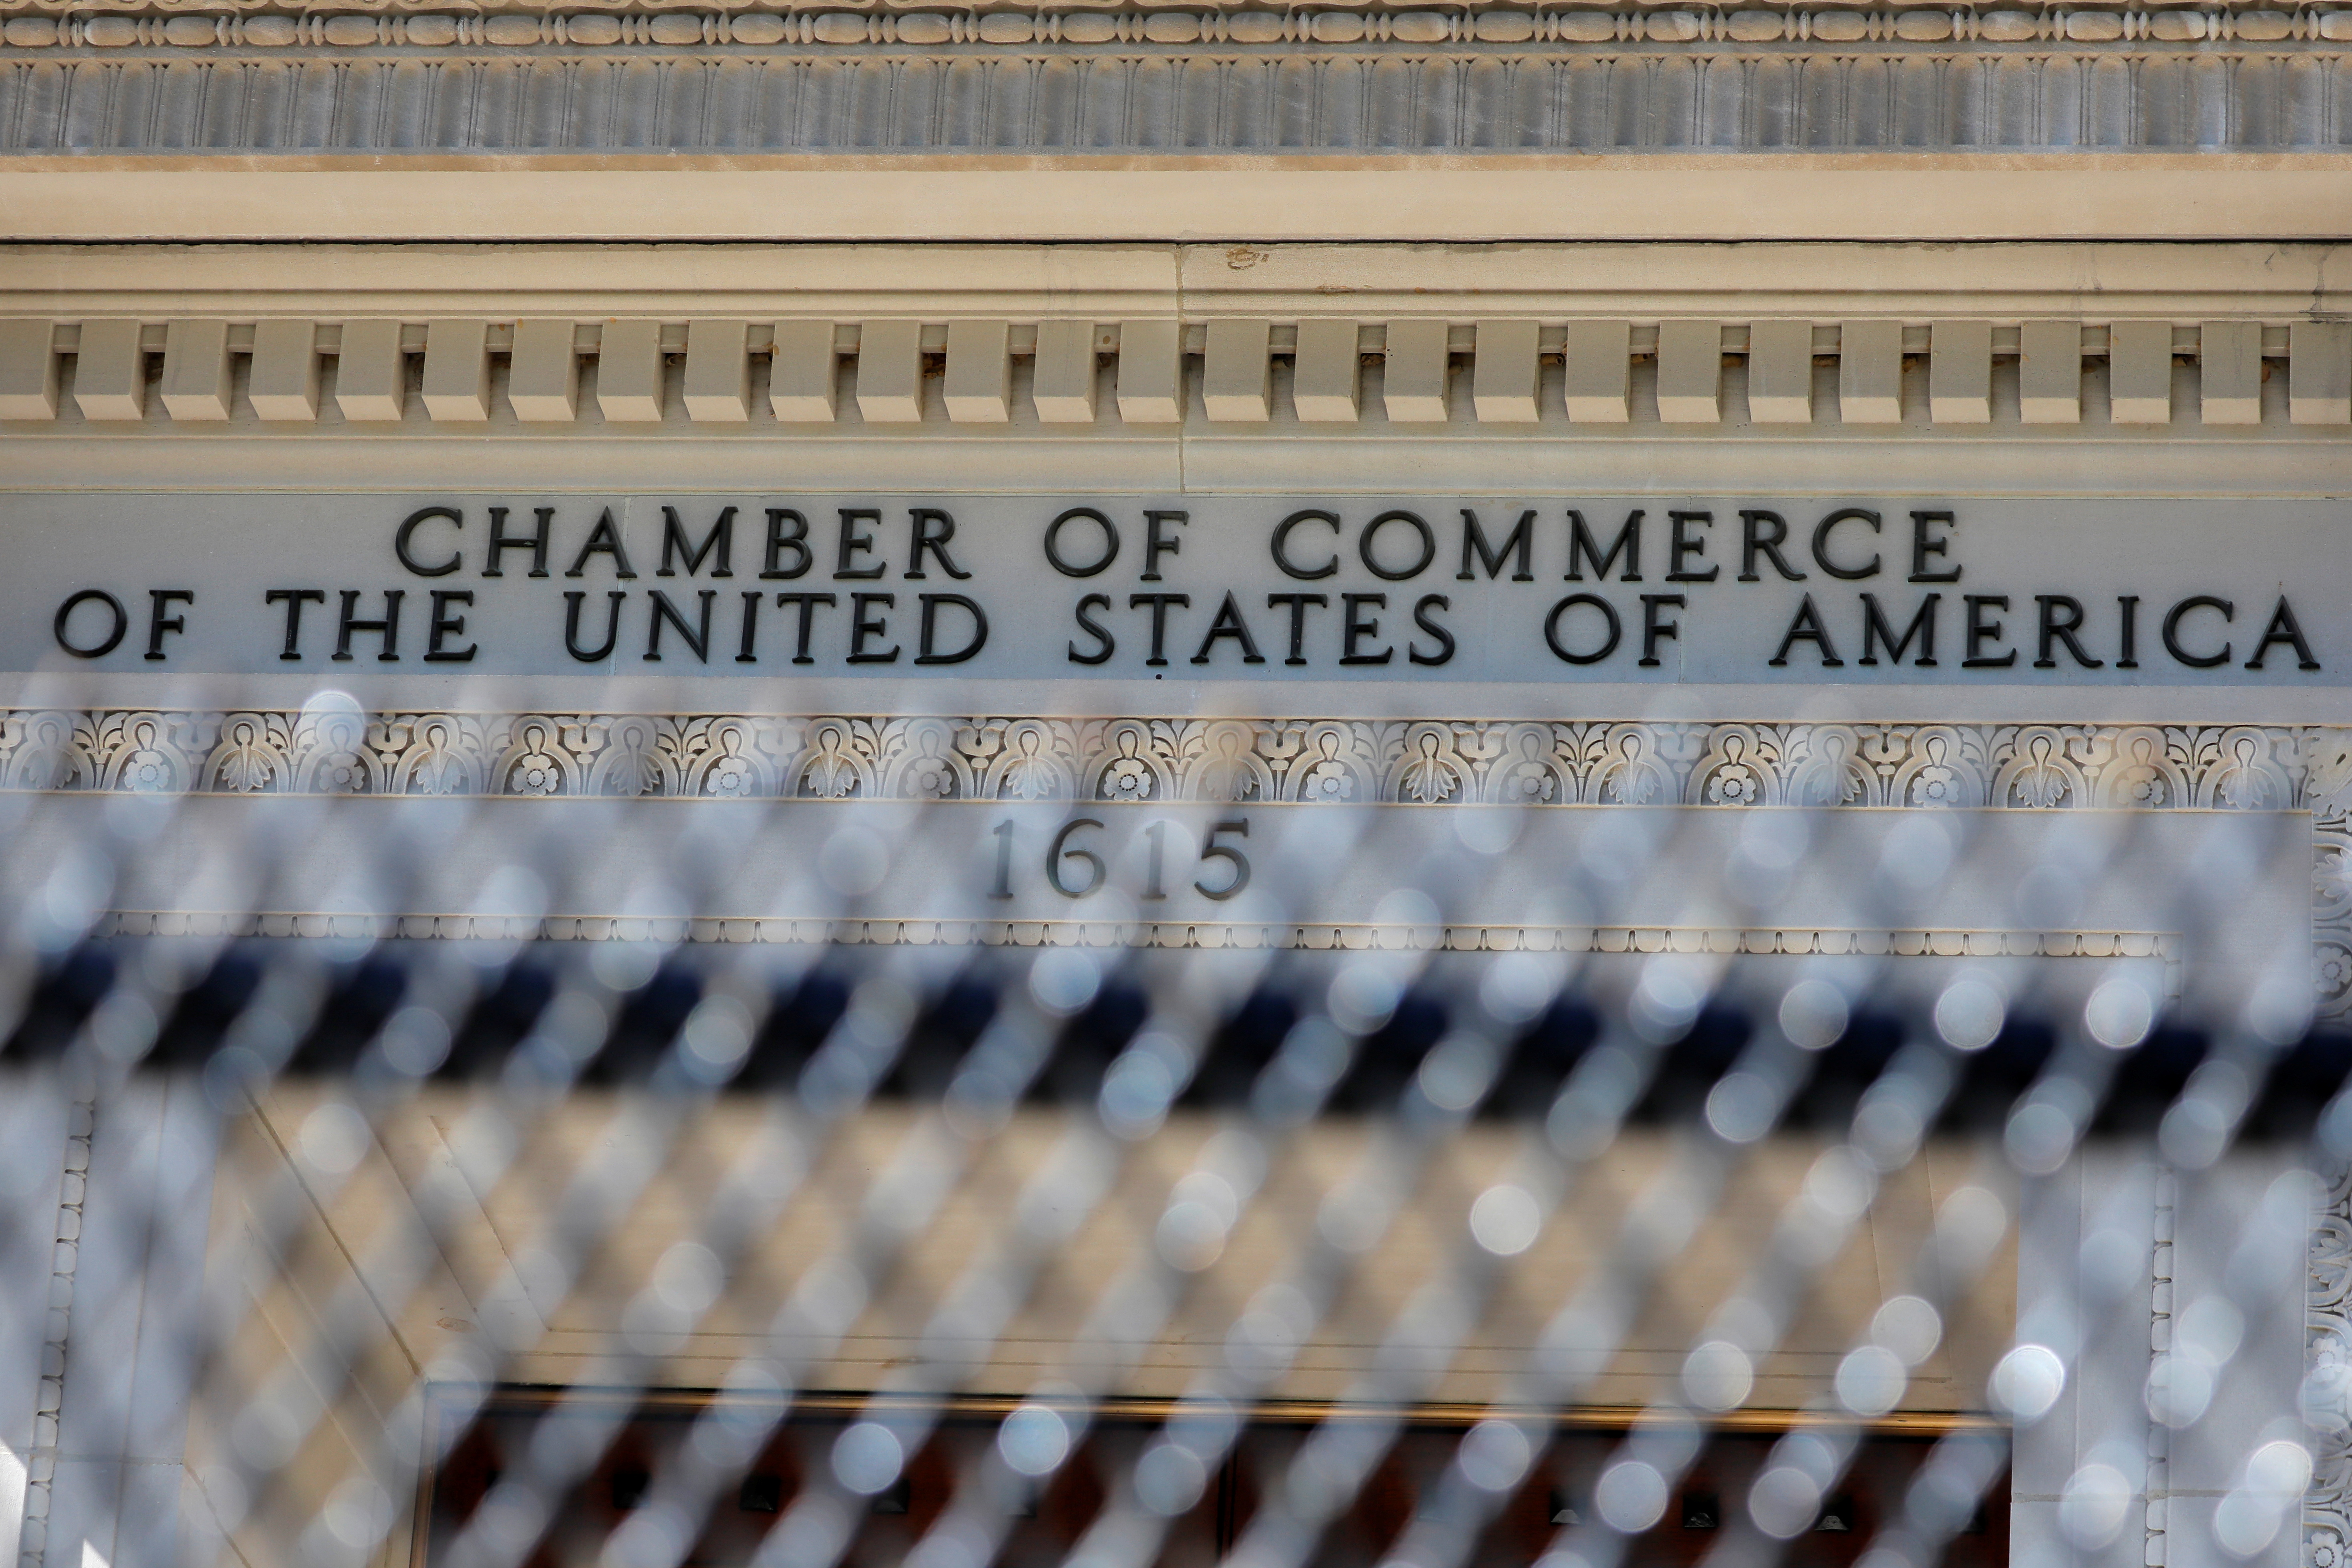 The United States Chamber of Commerce building is seen in Washington, D.C., U.S.